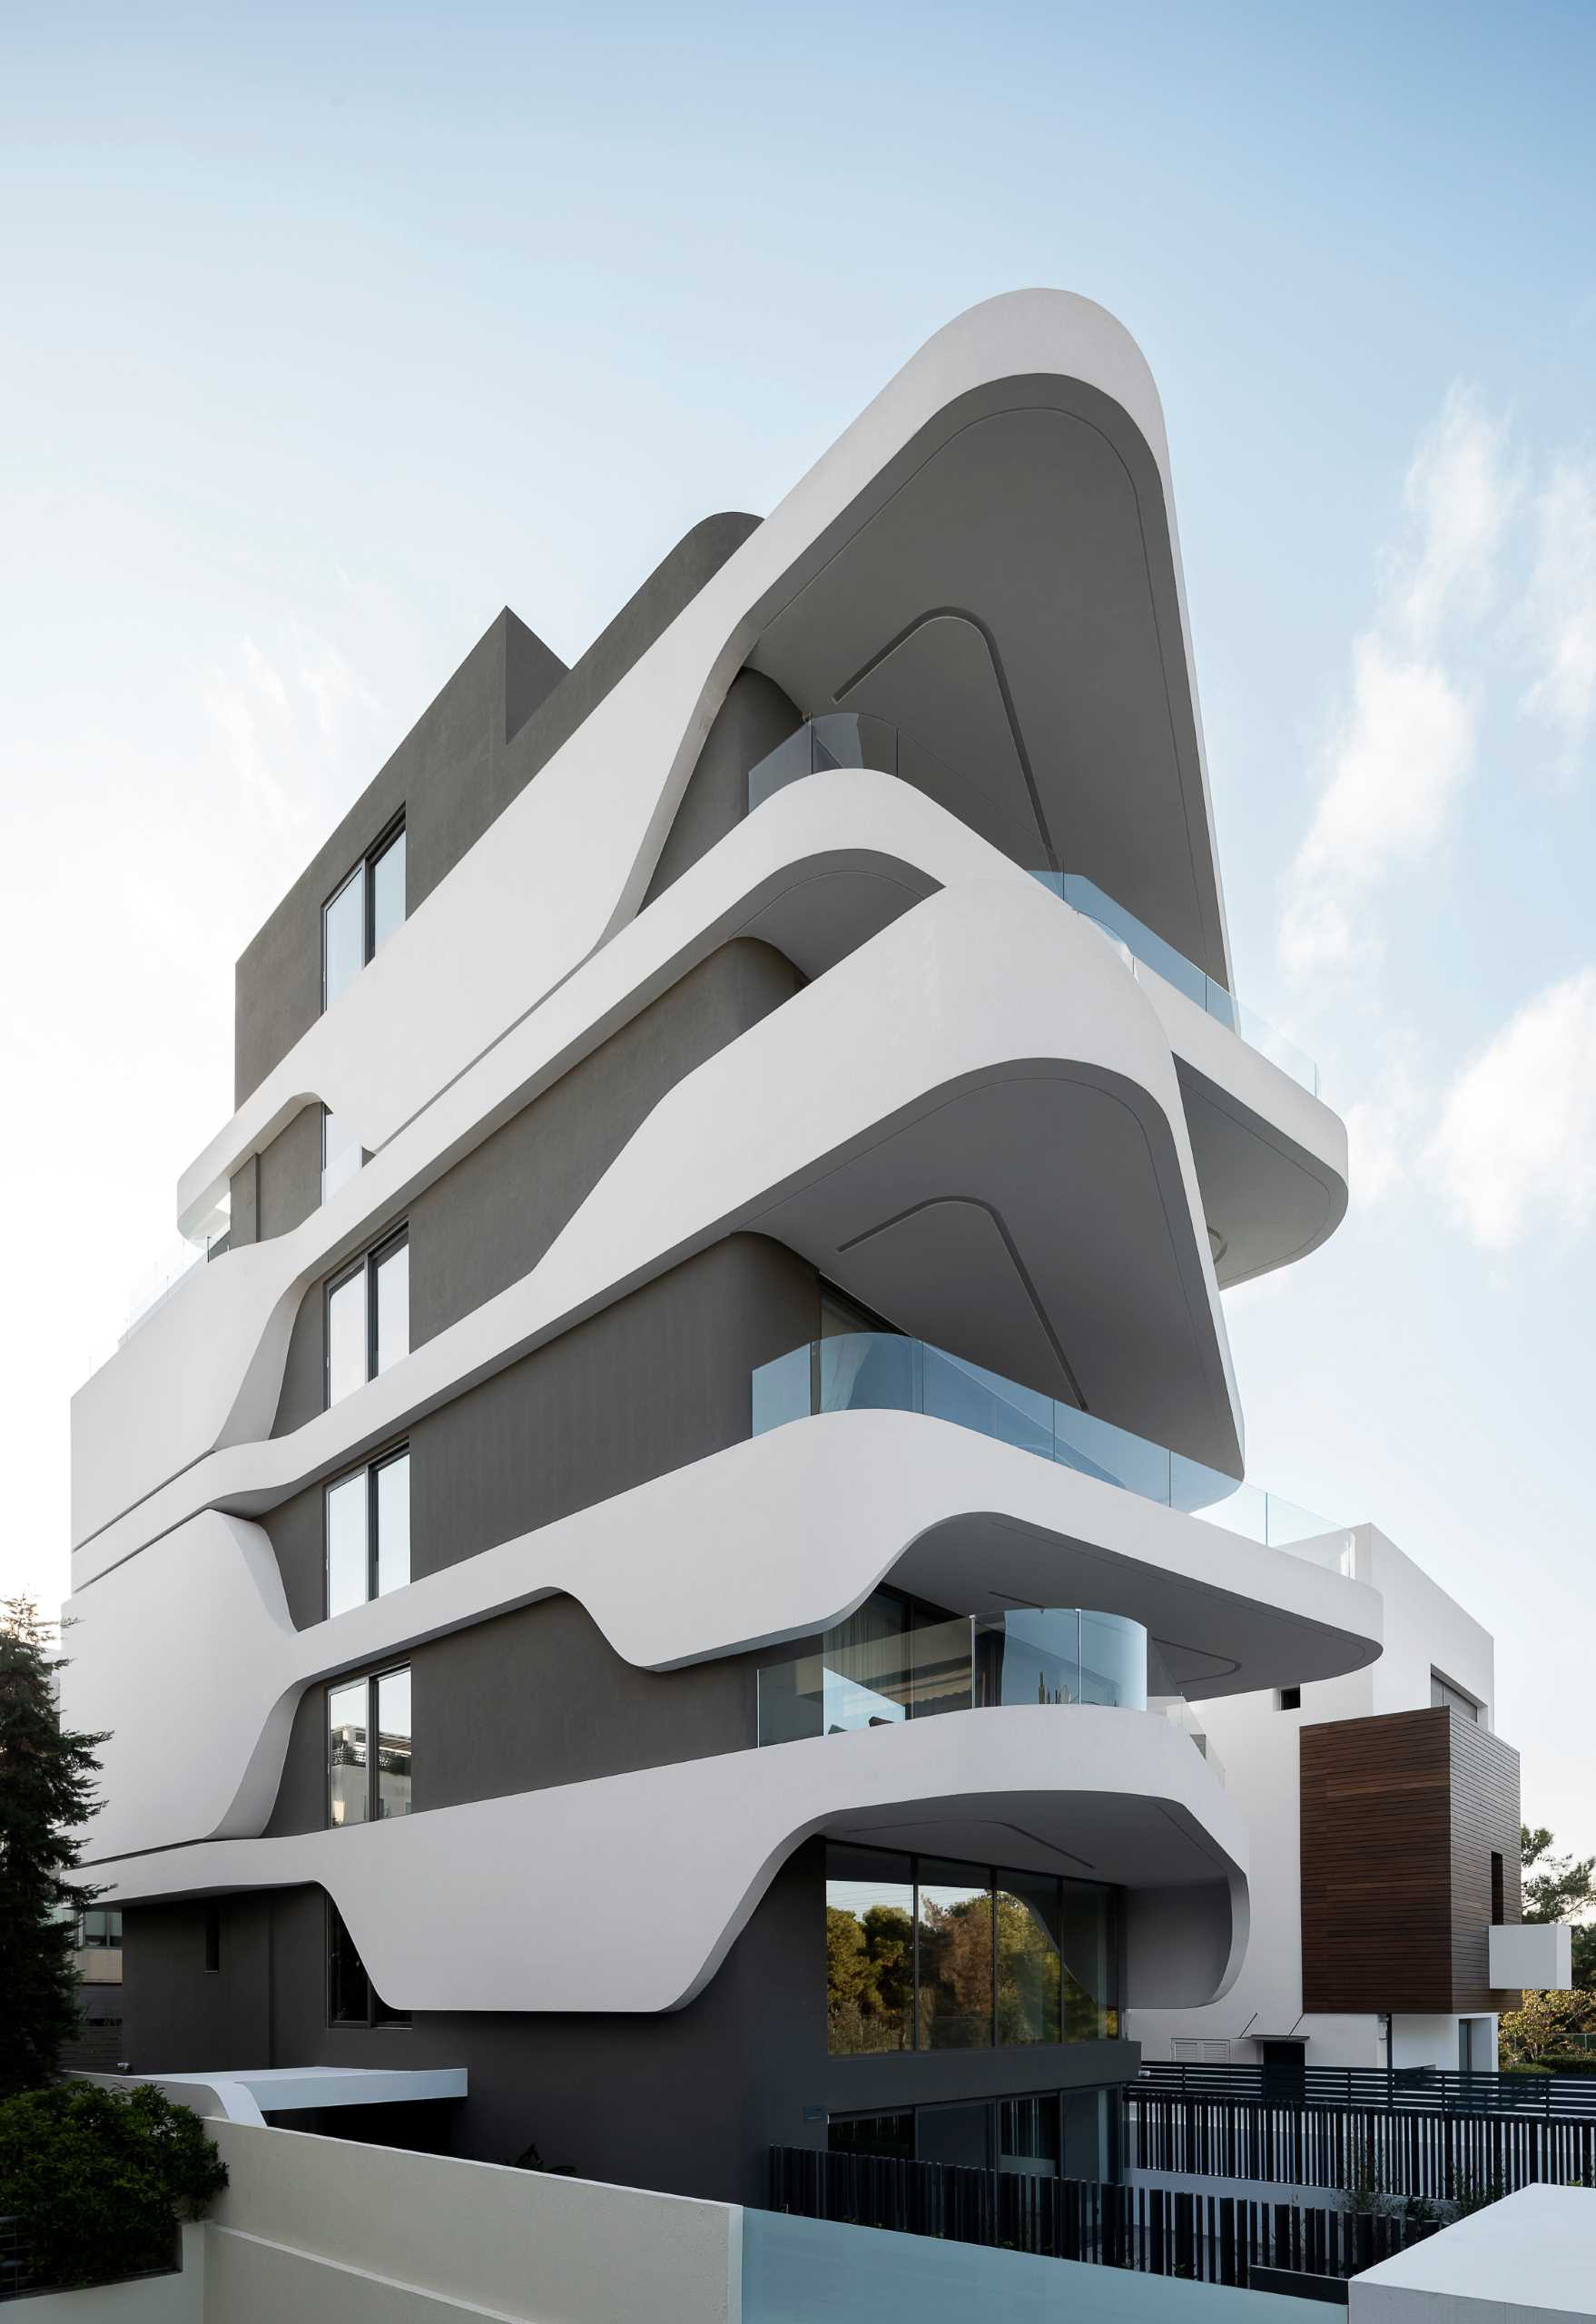 Key to the design of this modern apartment building are the curvilinear balconies that alternate directions creating a lively facade.